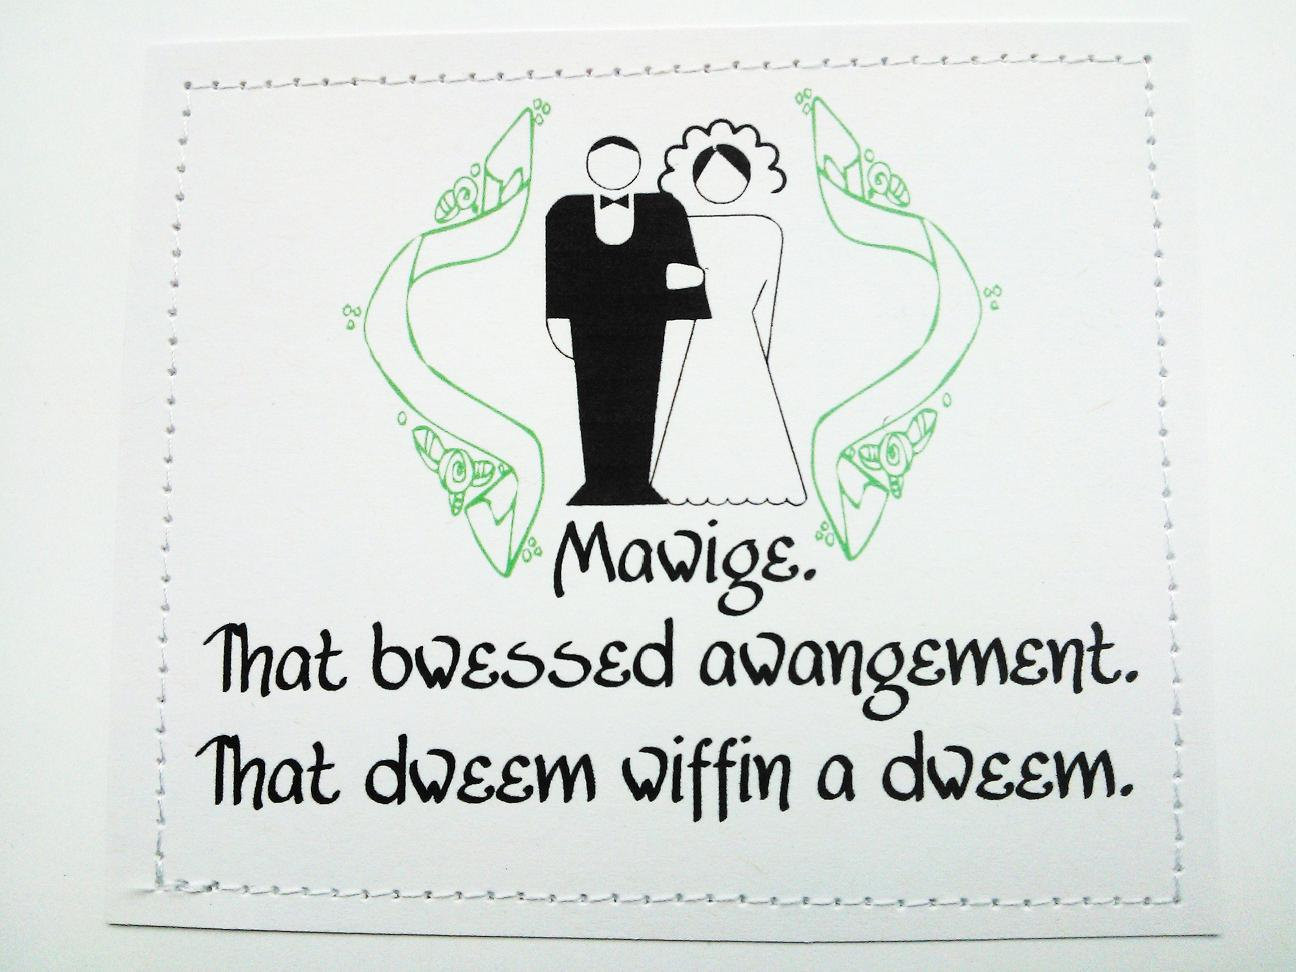 Princess Bride Quotes Marriage
 The Princess Bride quote wedding card Mawige by sewdandee